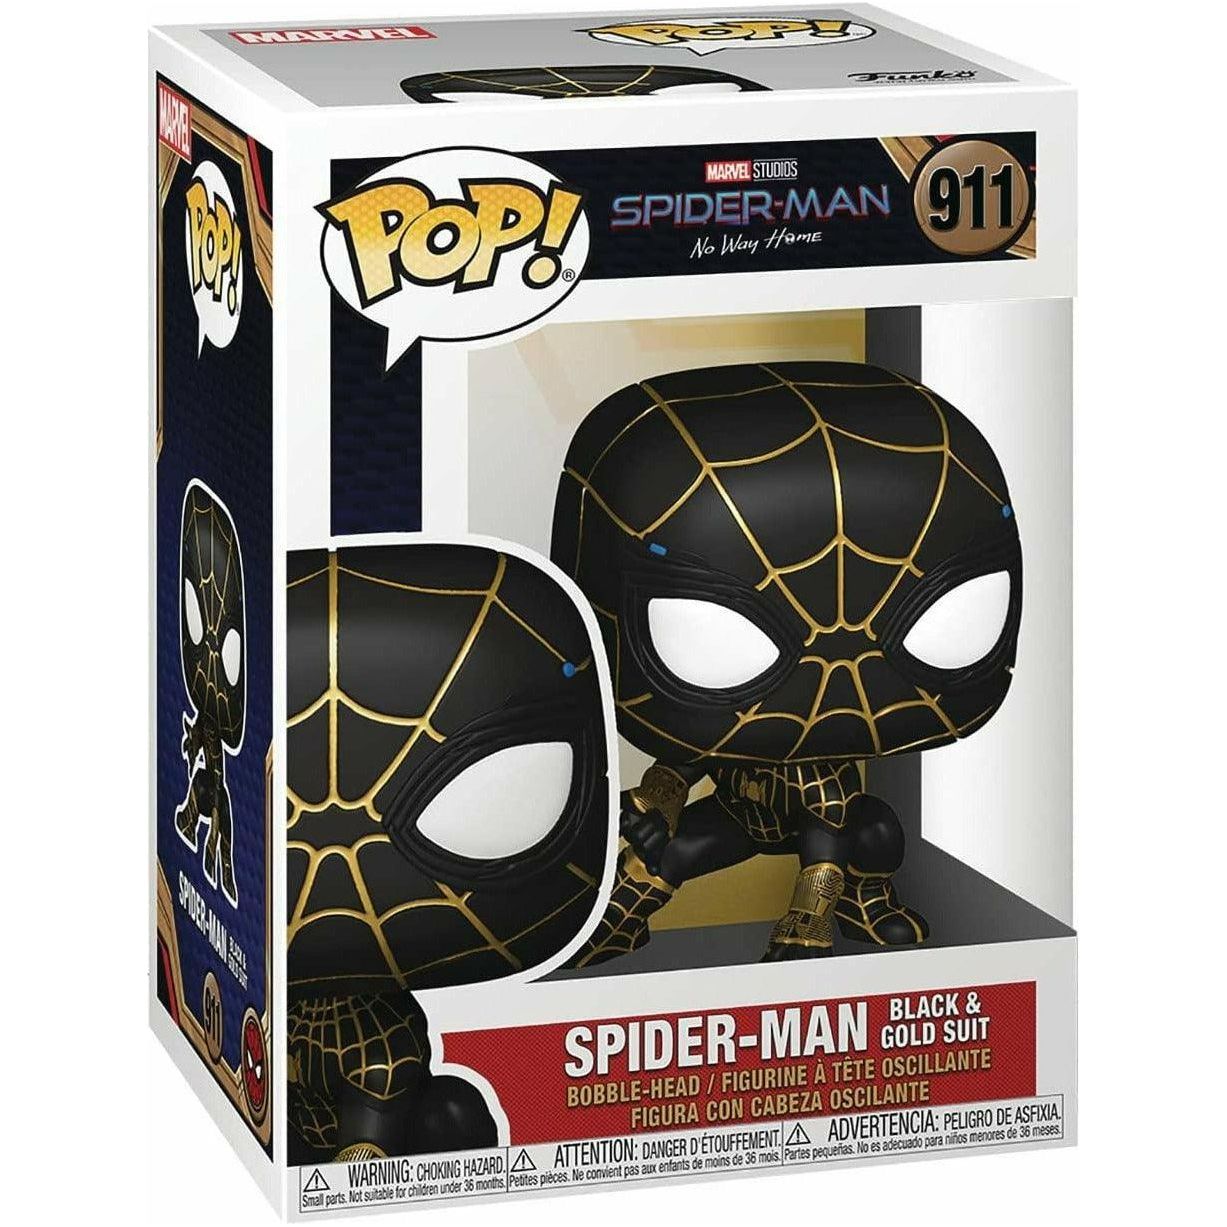 Funko Pop! Marvel Spider-Man Spiderman in Black and Gold Suit - BumbleToys - 18+, Action Figures, Avengers, Boys, Characters, Funko, Pre-Order, Spider man, Spiderman